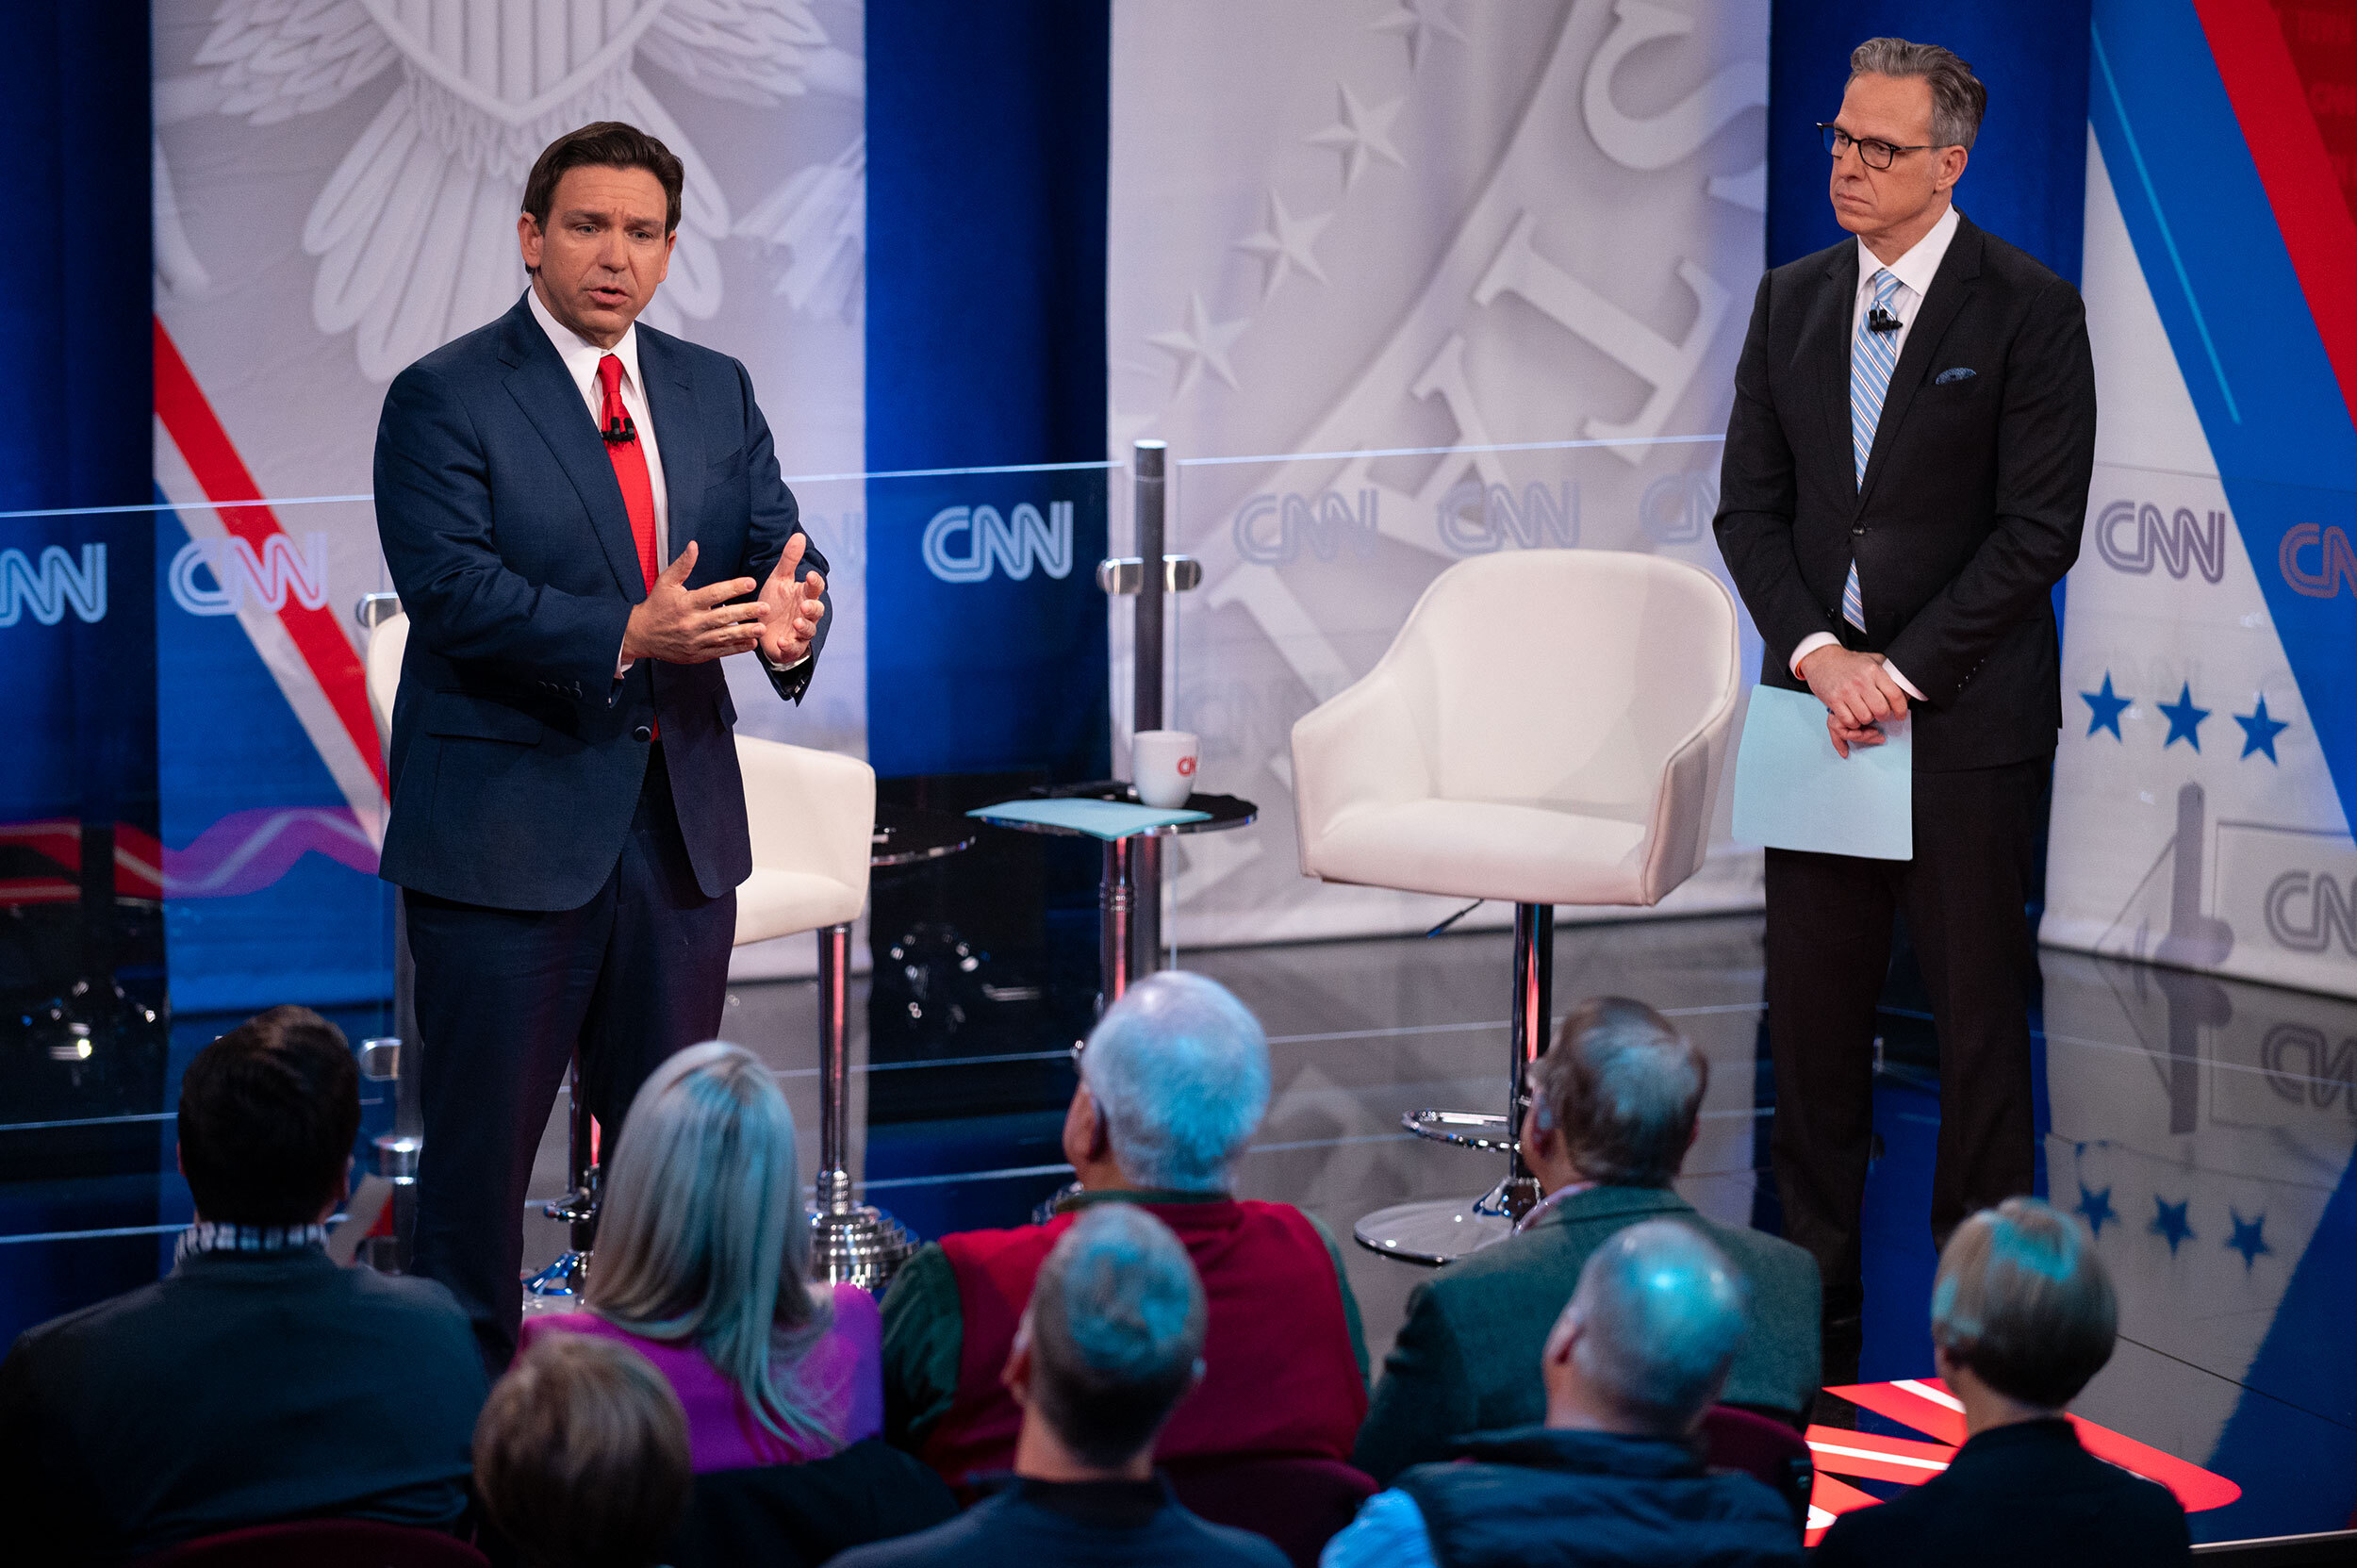 Republican presidential candidate and Florida Gov. Ron DeSantis participates in a CNN Republican Town Hall moderated by CNN’s Jake Tapper at Grand View University in Des Moines, Iowa, on Tuesday, December 12.